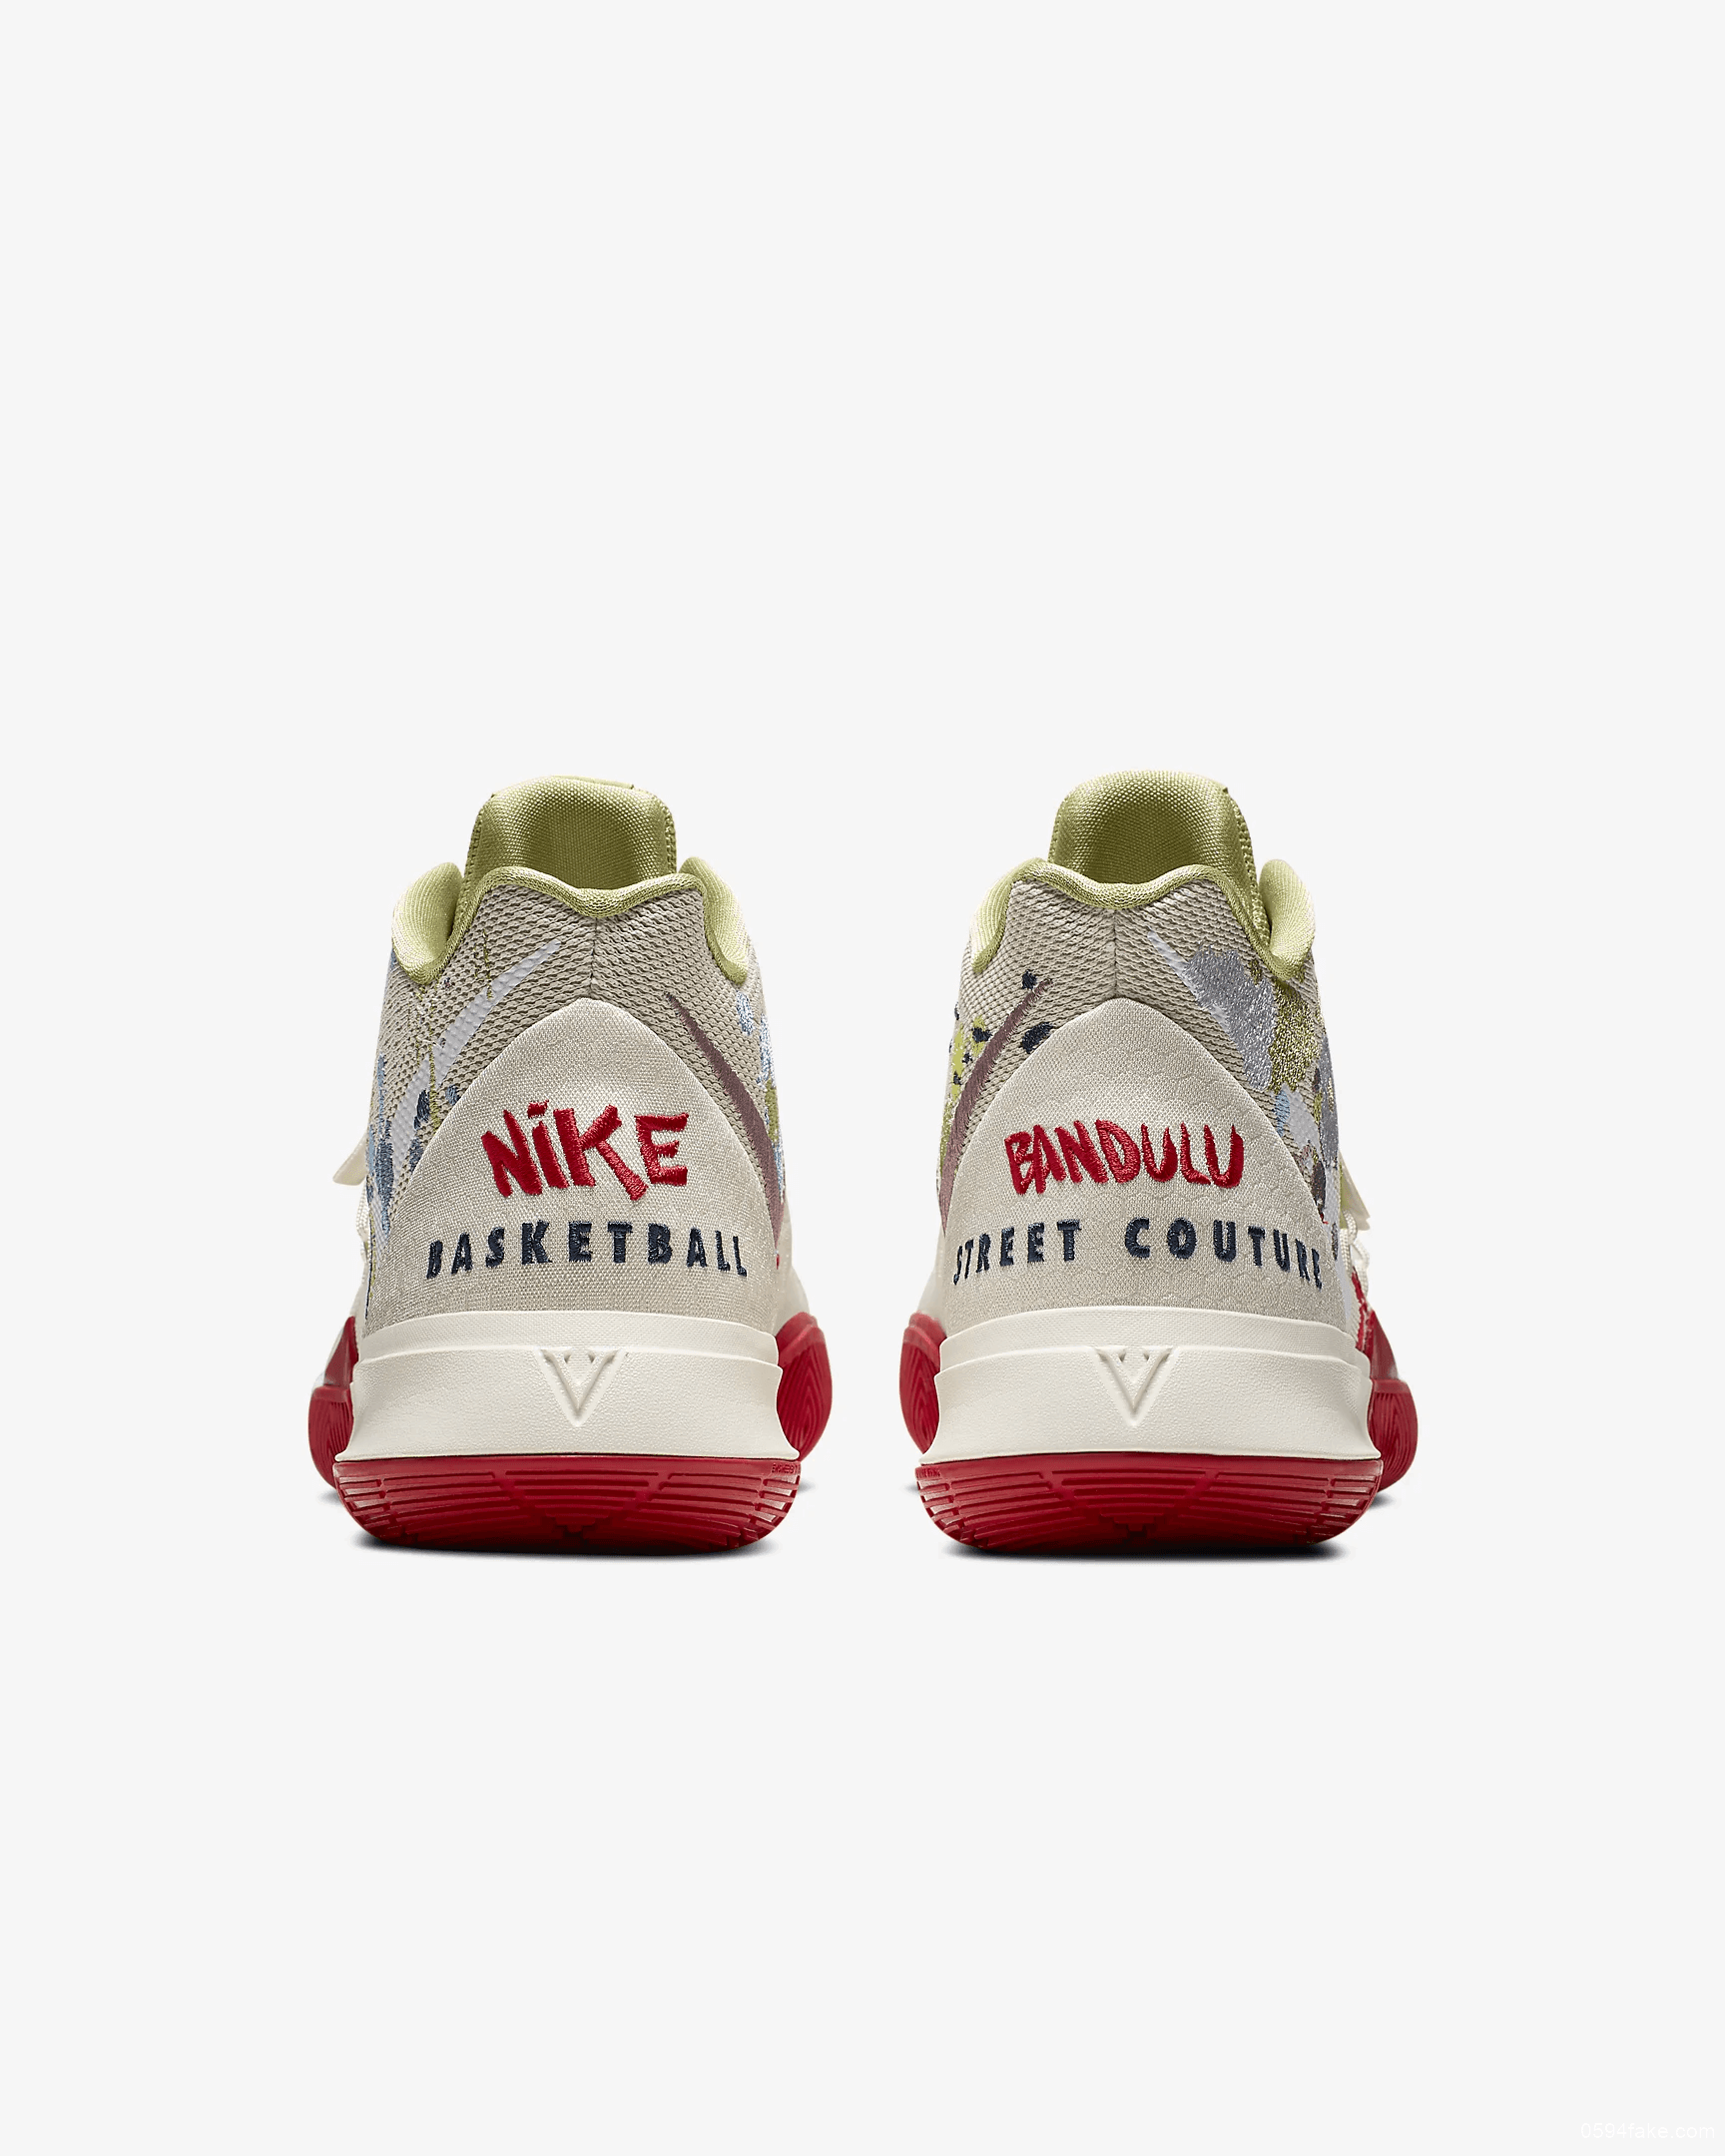 Nike Bandulu x Kyrie 5 EP 'Embroidered Splatters' CK5837-100: Exclusive Collaboration for Nike Basketball Fans